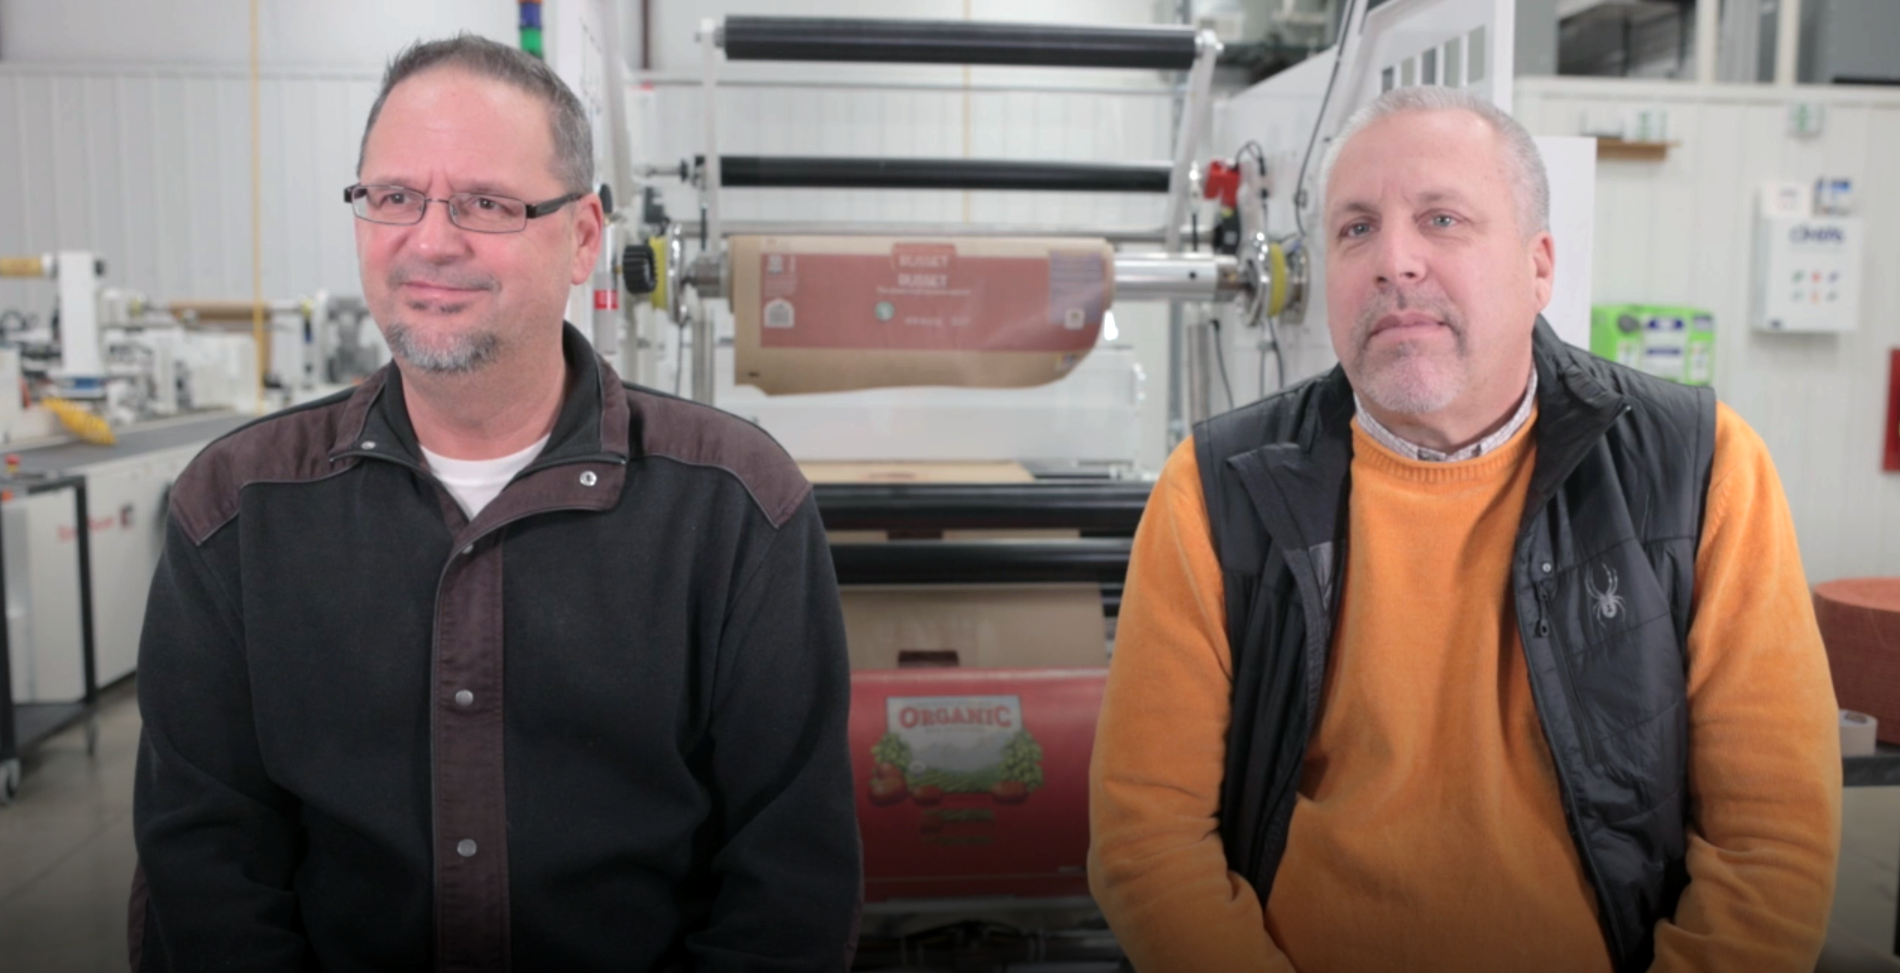 Neil Bretl and Mark Resch of The Paper People